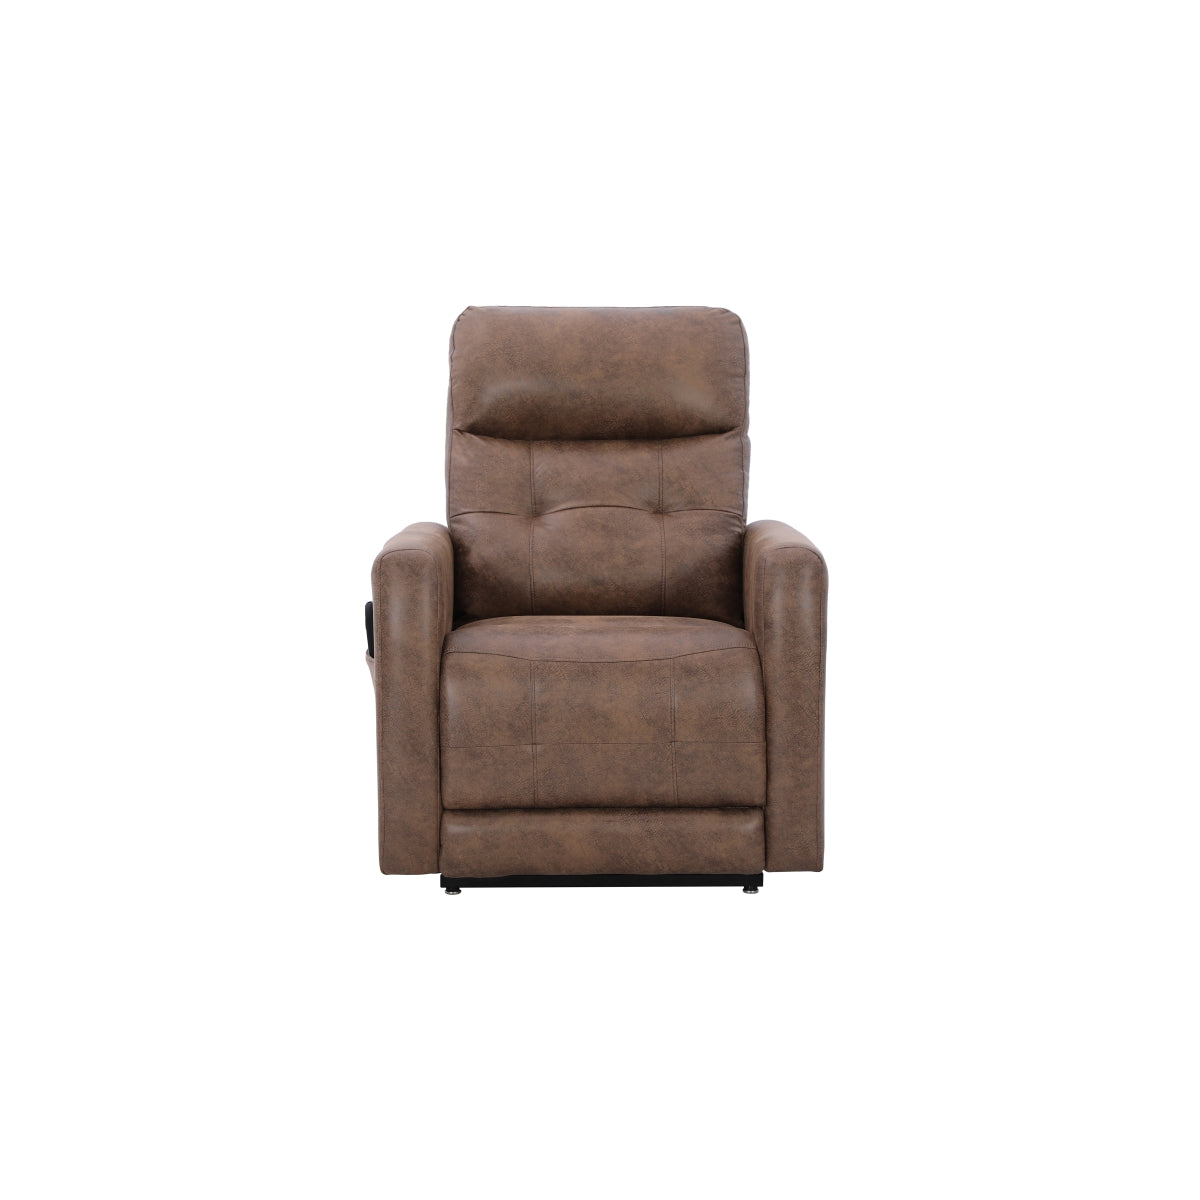 Aisha Medical Lift Chair with Power Headrests Brown 99988